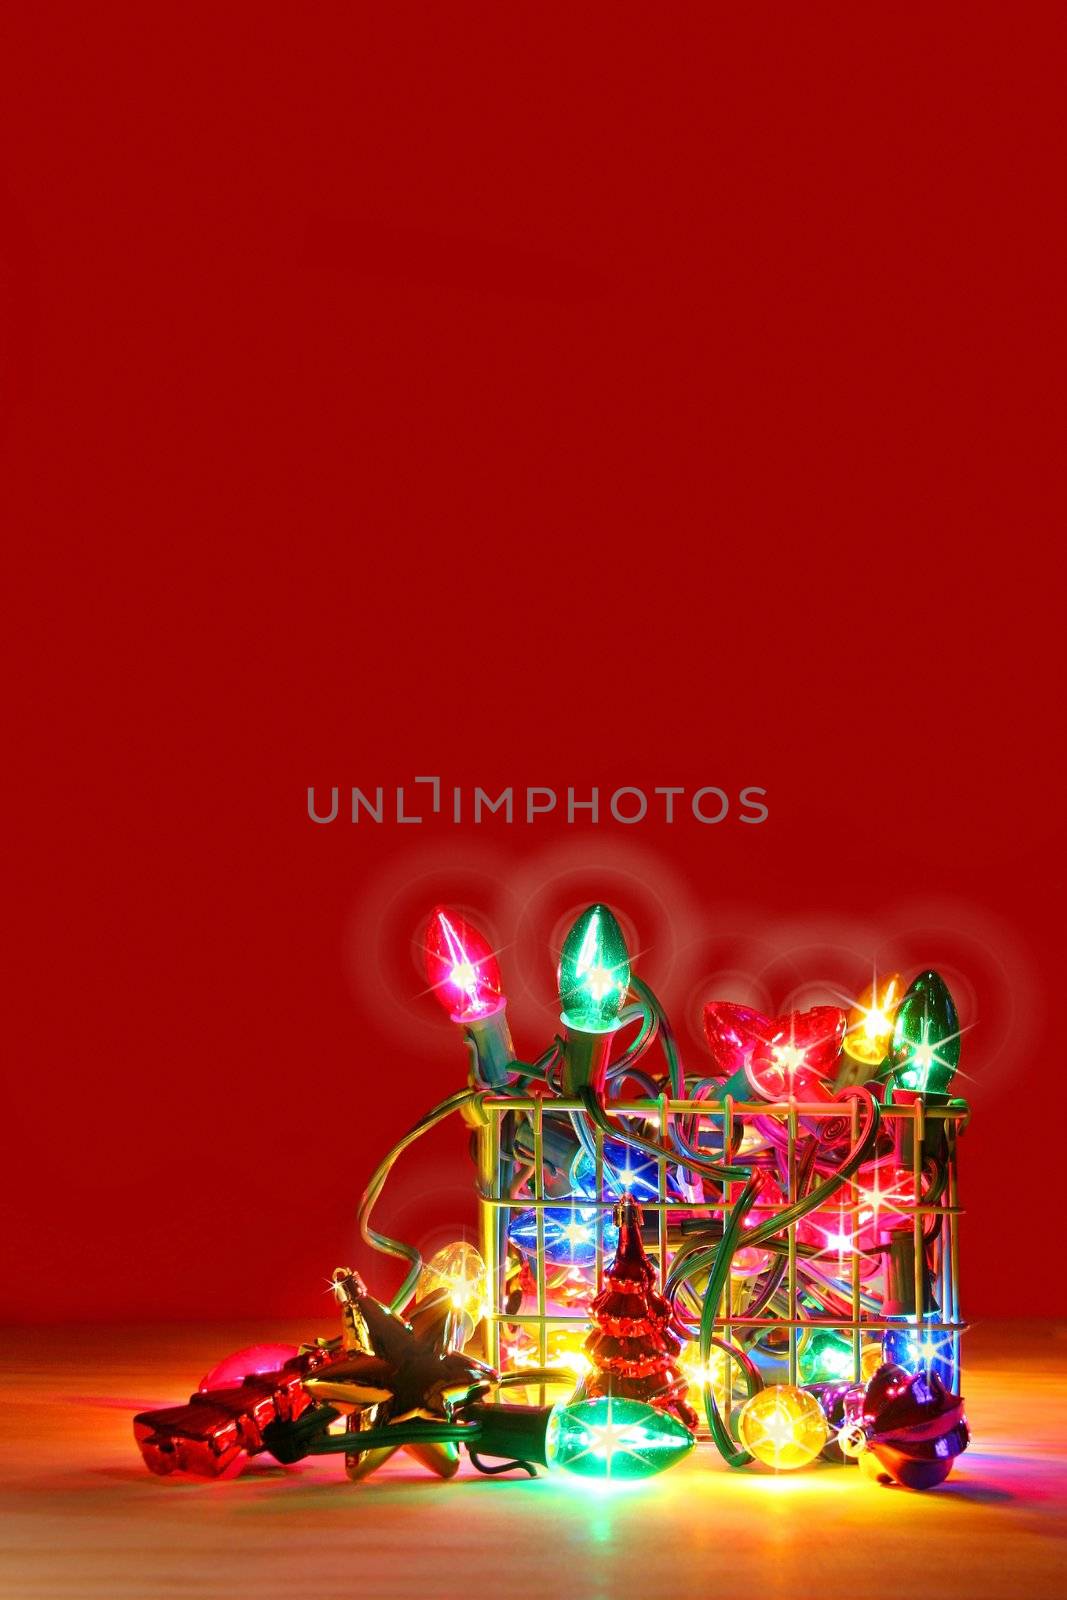 Basket filled with lights by Sandralise